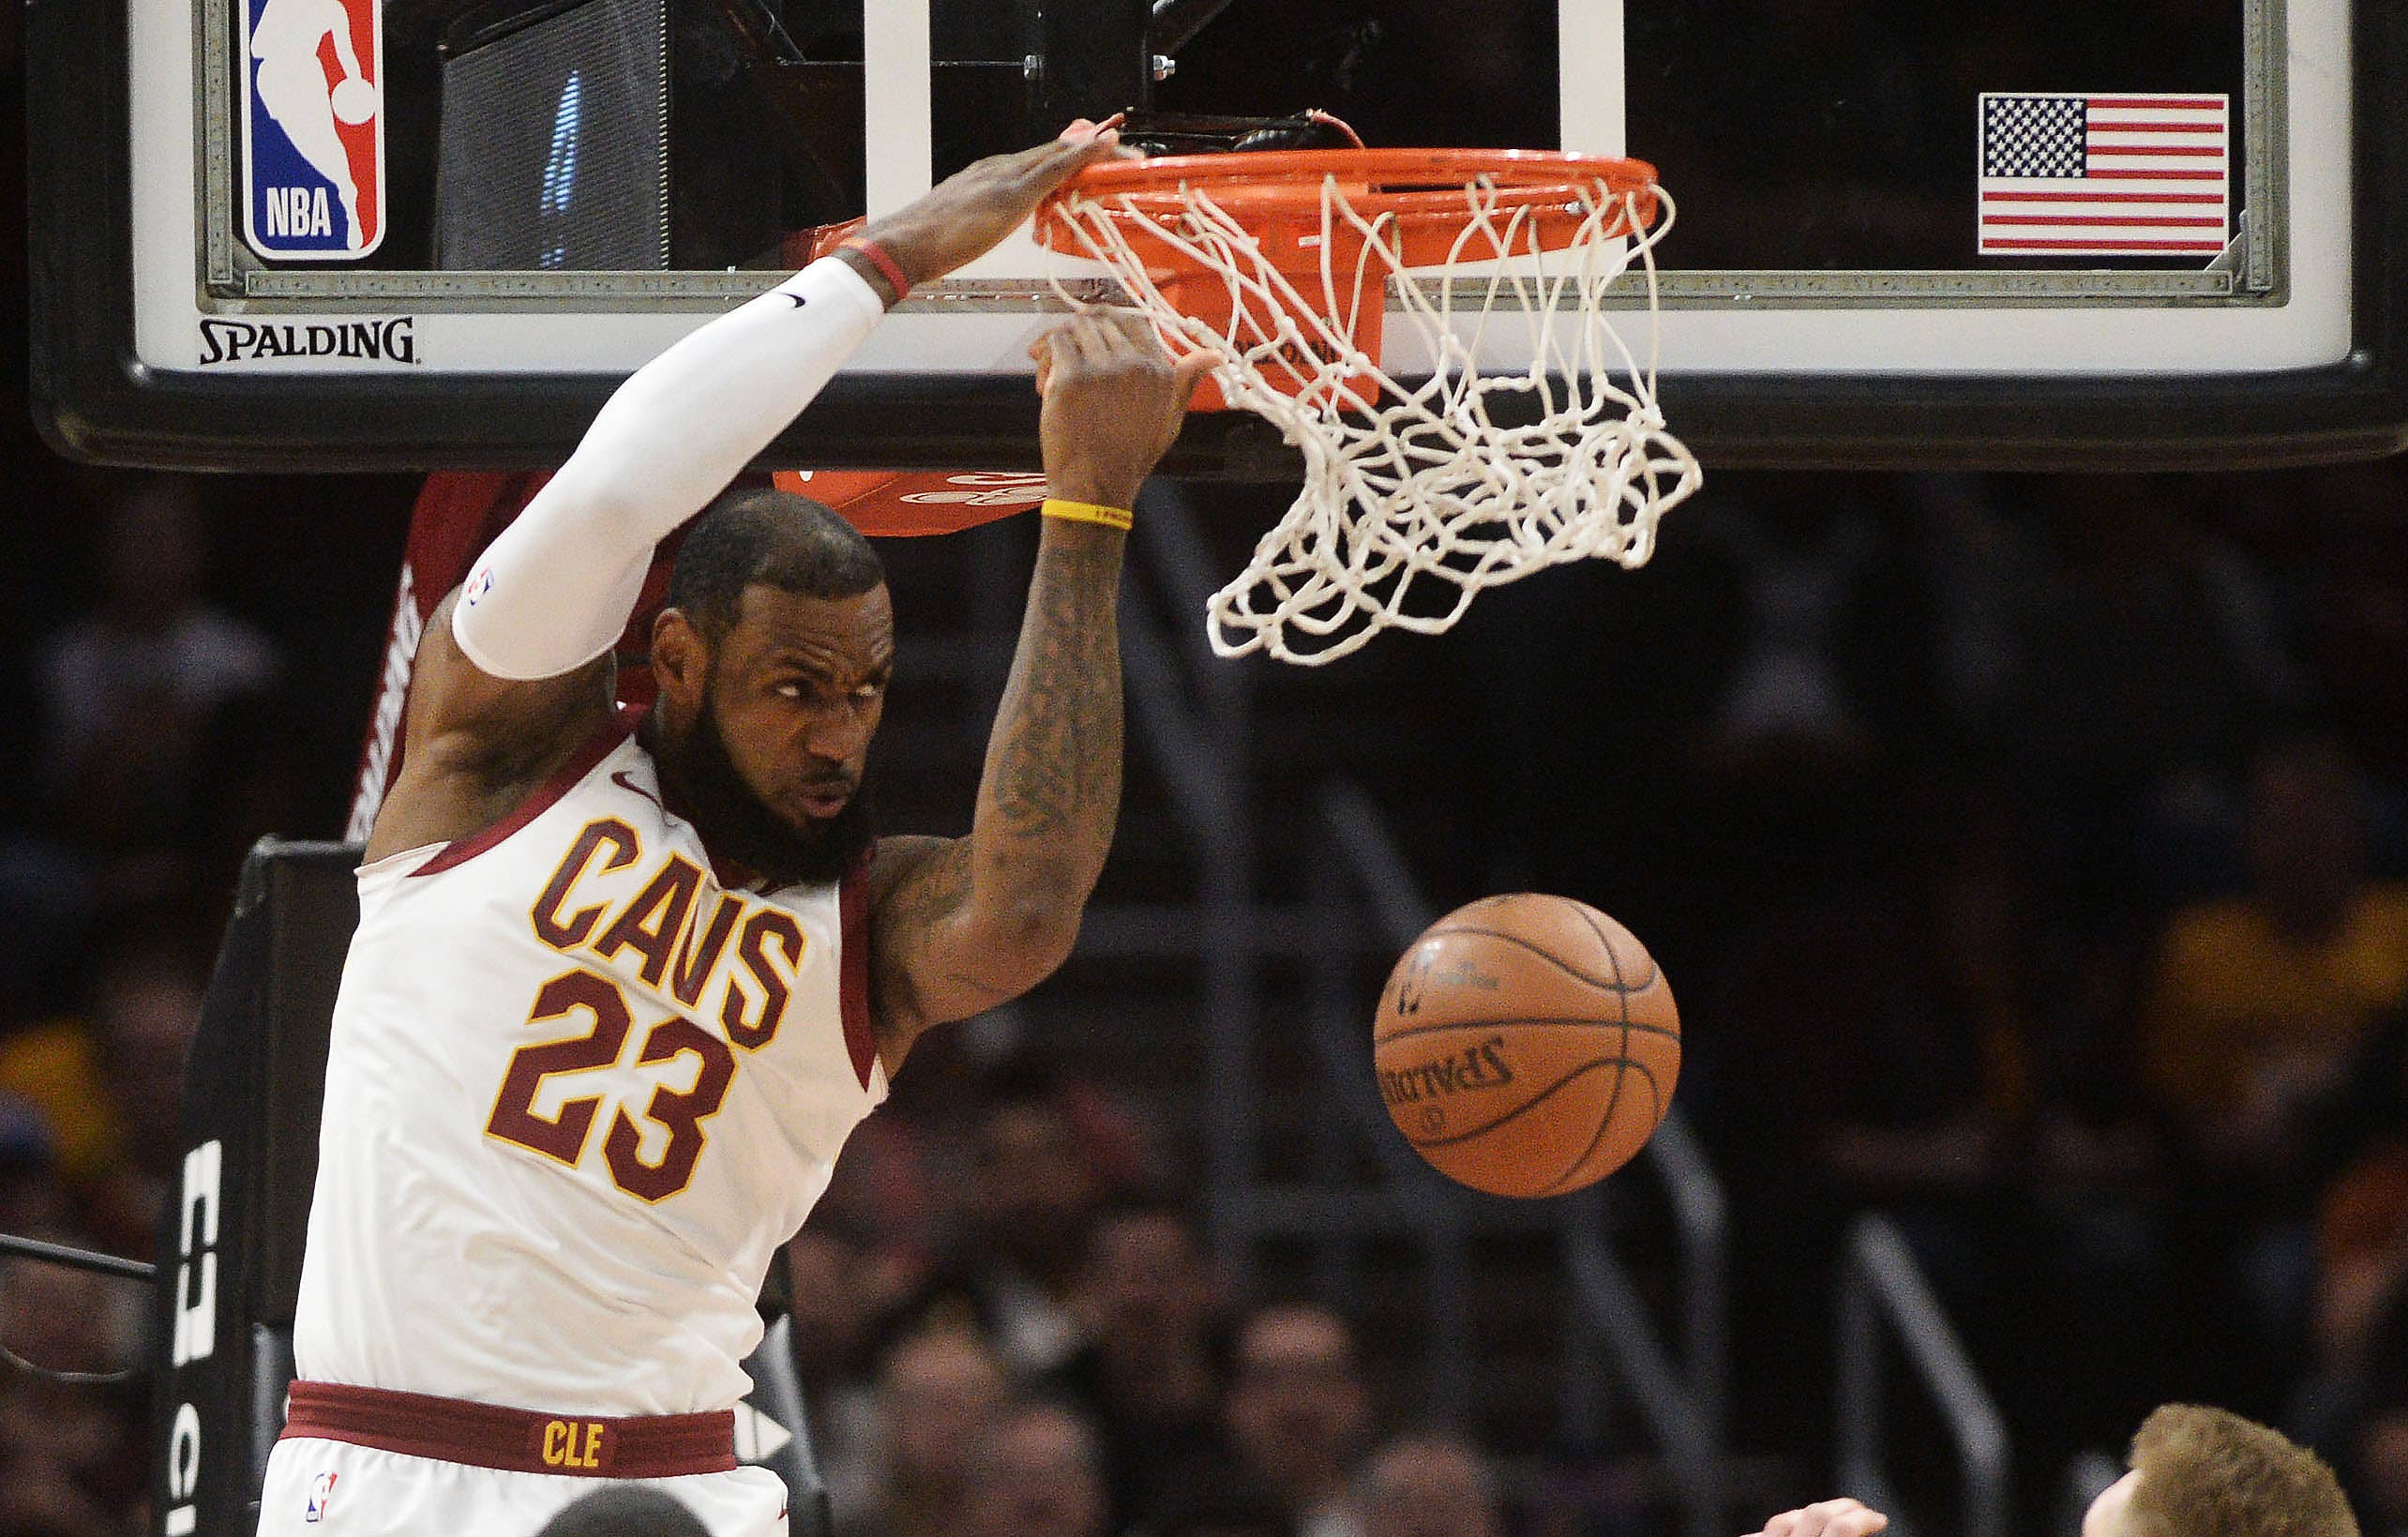 LeBron James dunks against the Indiana Pacers on January 26, 2018.